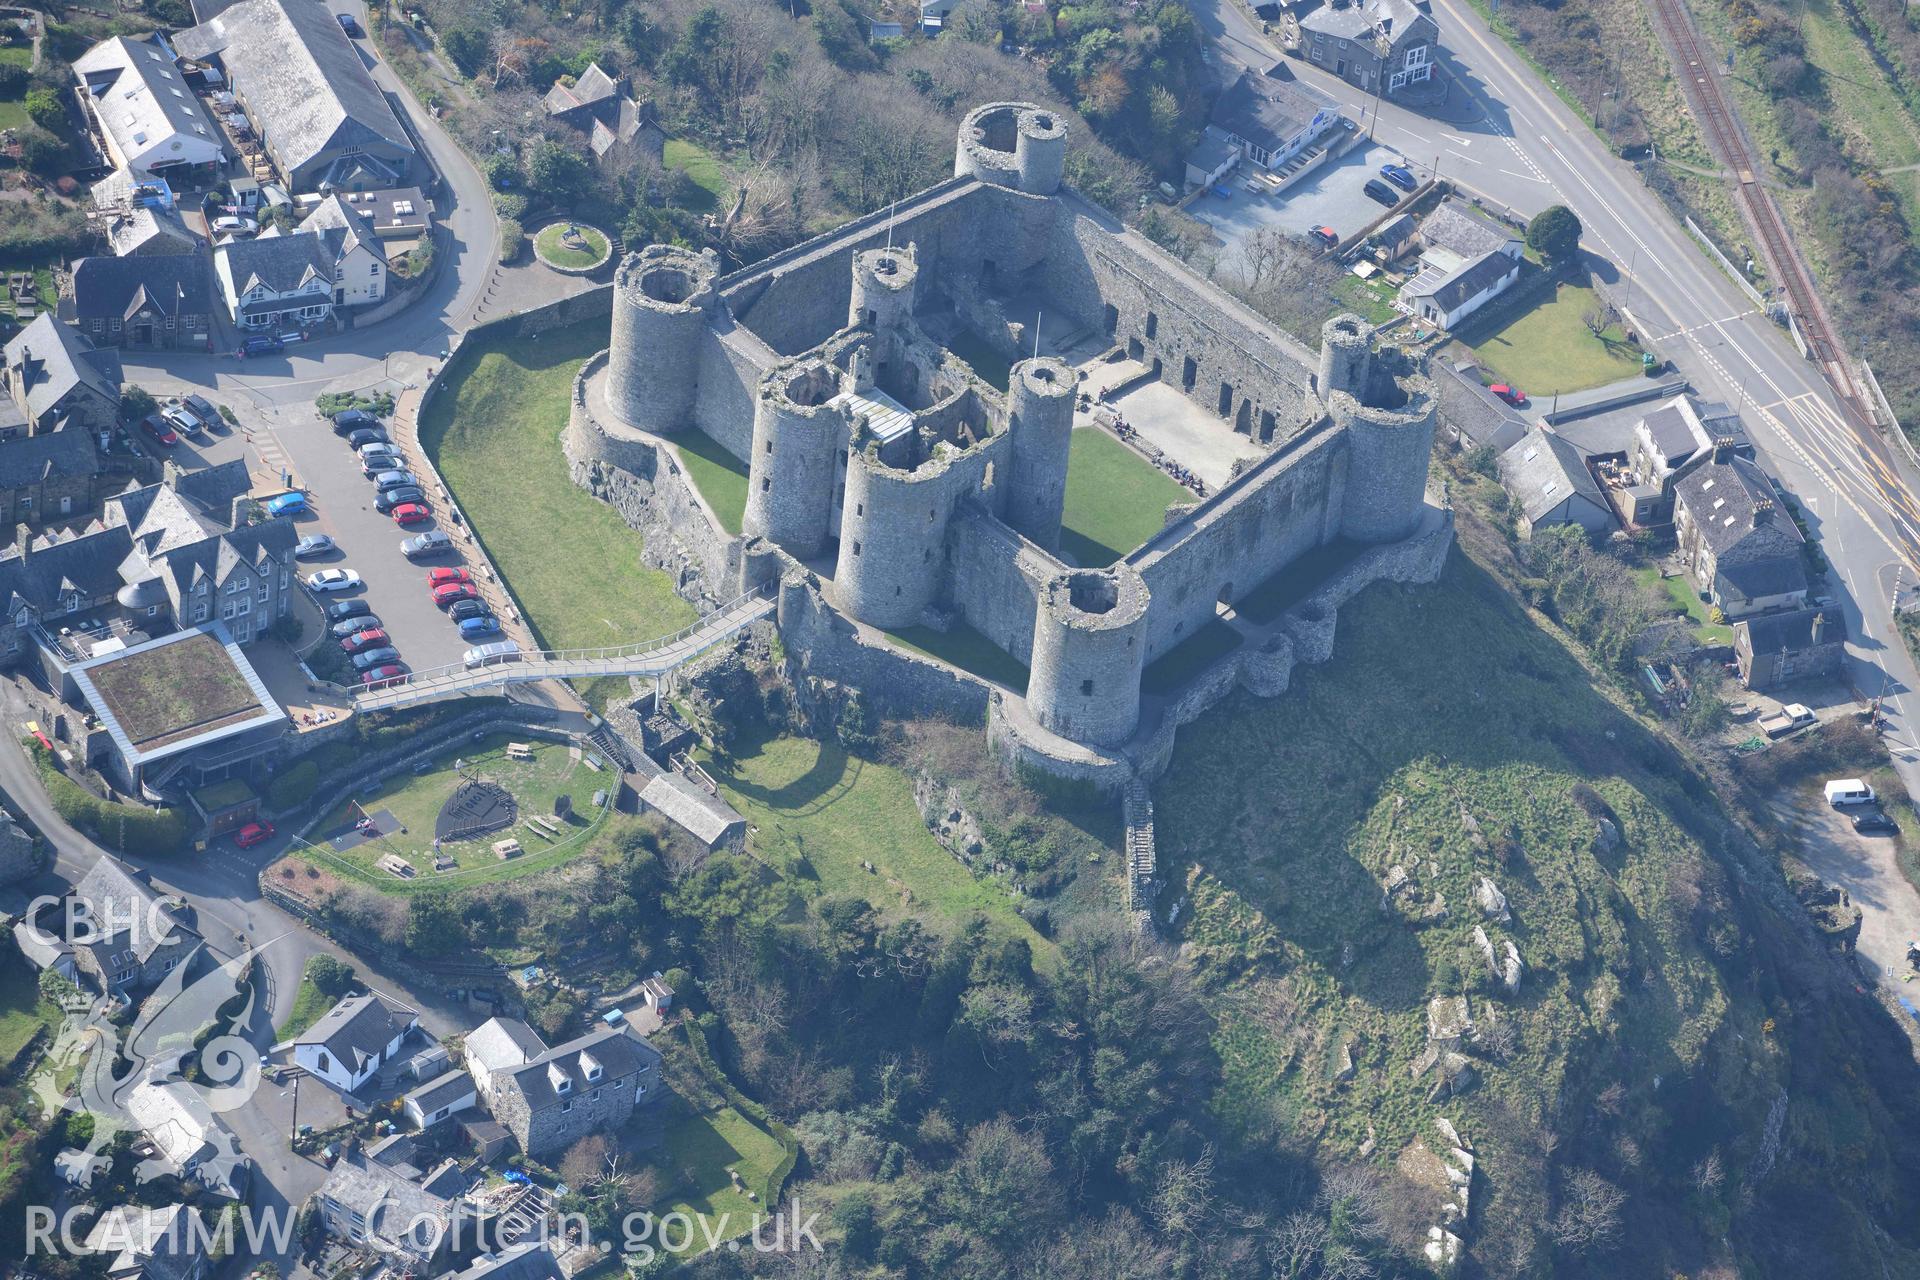 Harlech Castle and Town. Oblique aerial photographs taken during the Royal Commission’s programme of archaeological aerial reconnaissance by Toby Driver on 25 March 2022.